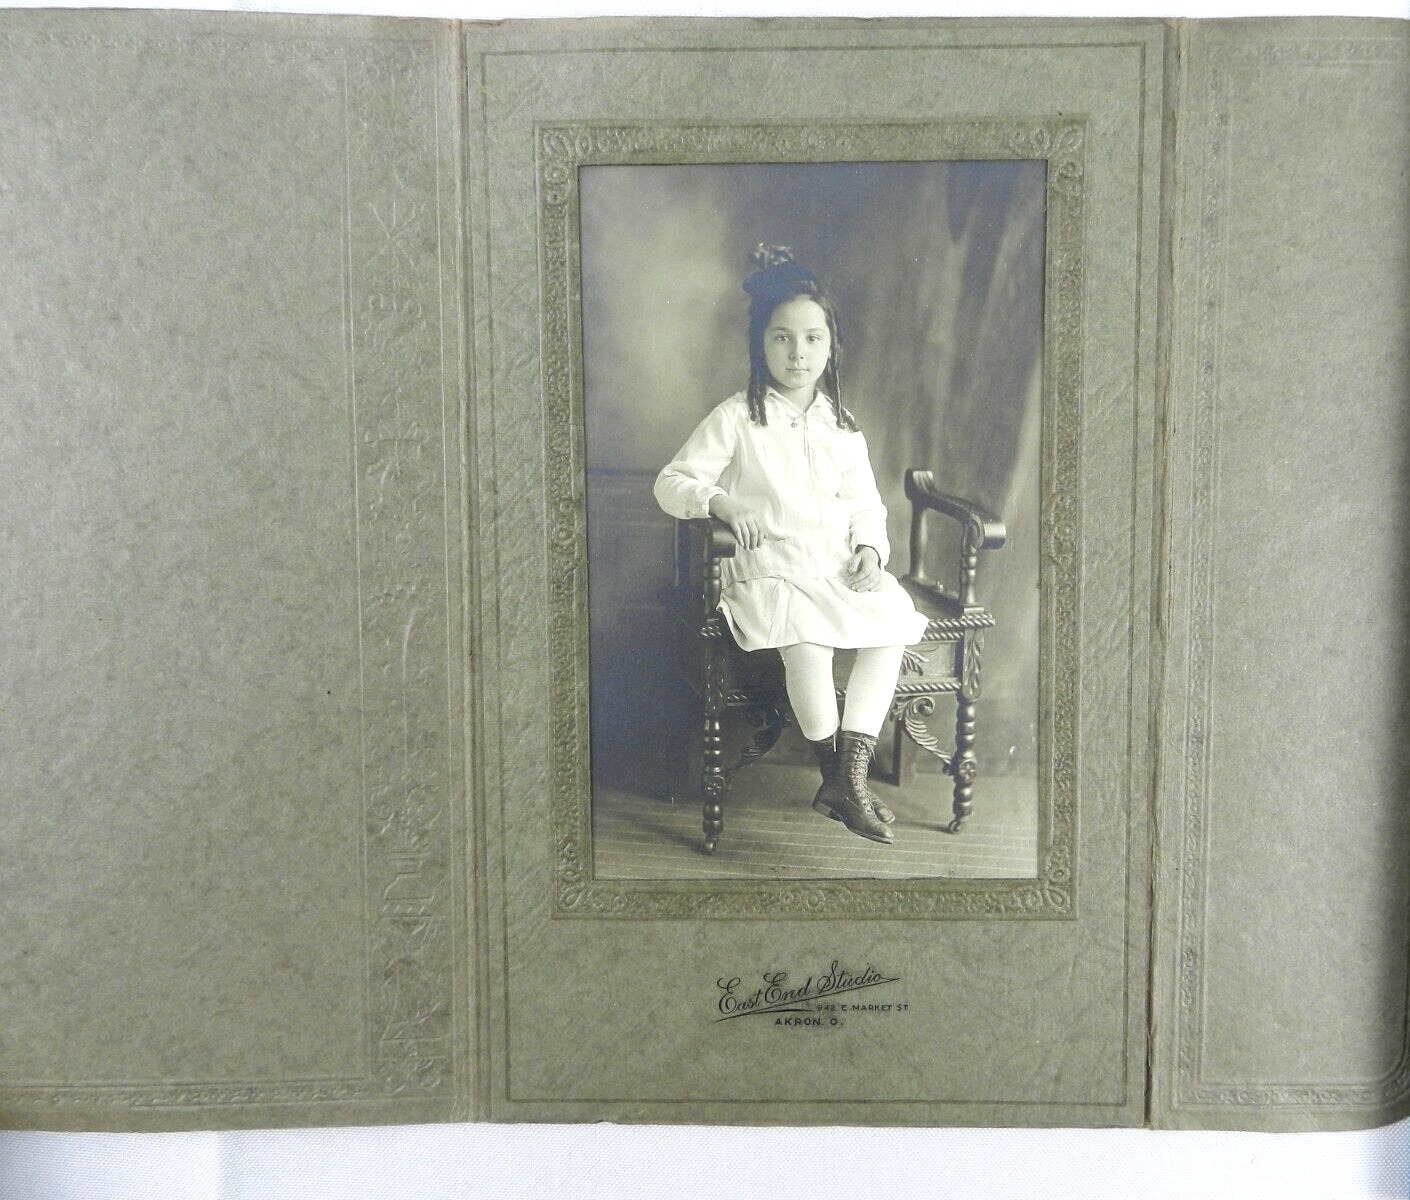 Young Girl Long Curly Hair in White Blouse Portrait  - c.1900s Cabinet Card